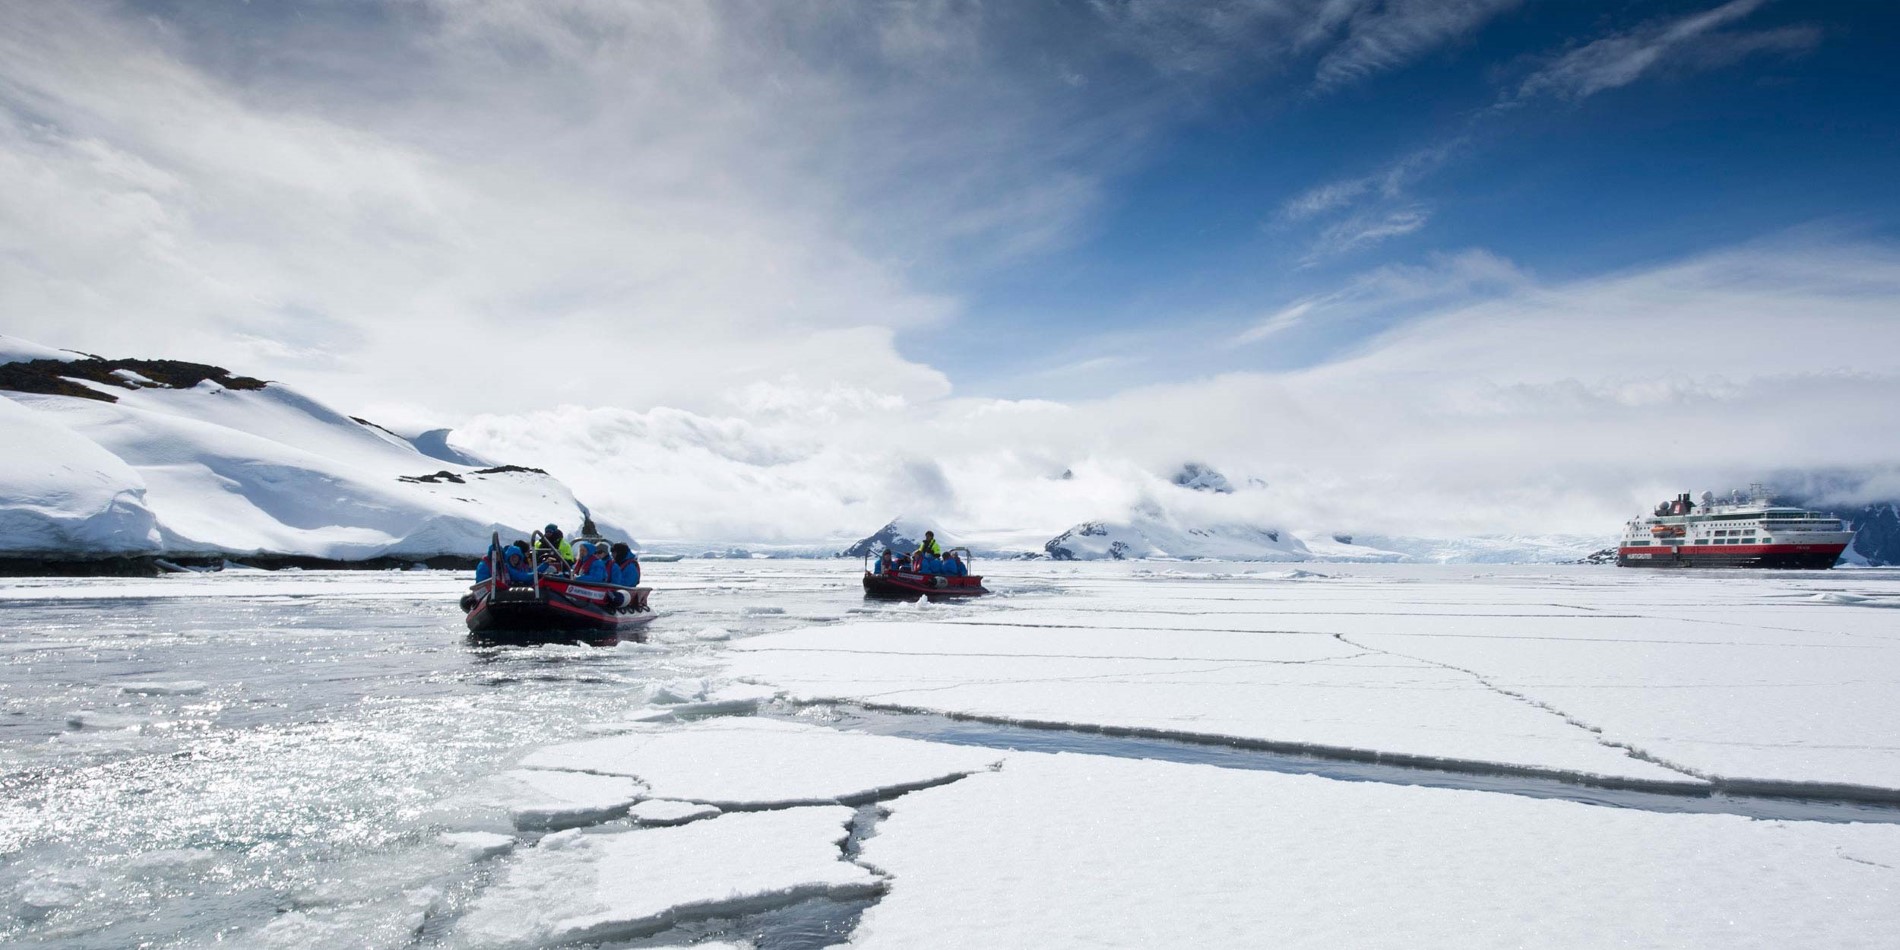 The Expedition team will seize opportunities to take you ice cruising to various landing sites in Antarctica, depending on the ice and wind conditions.